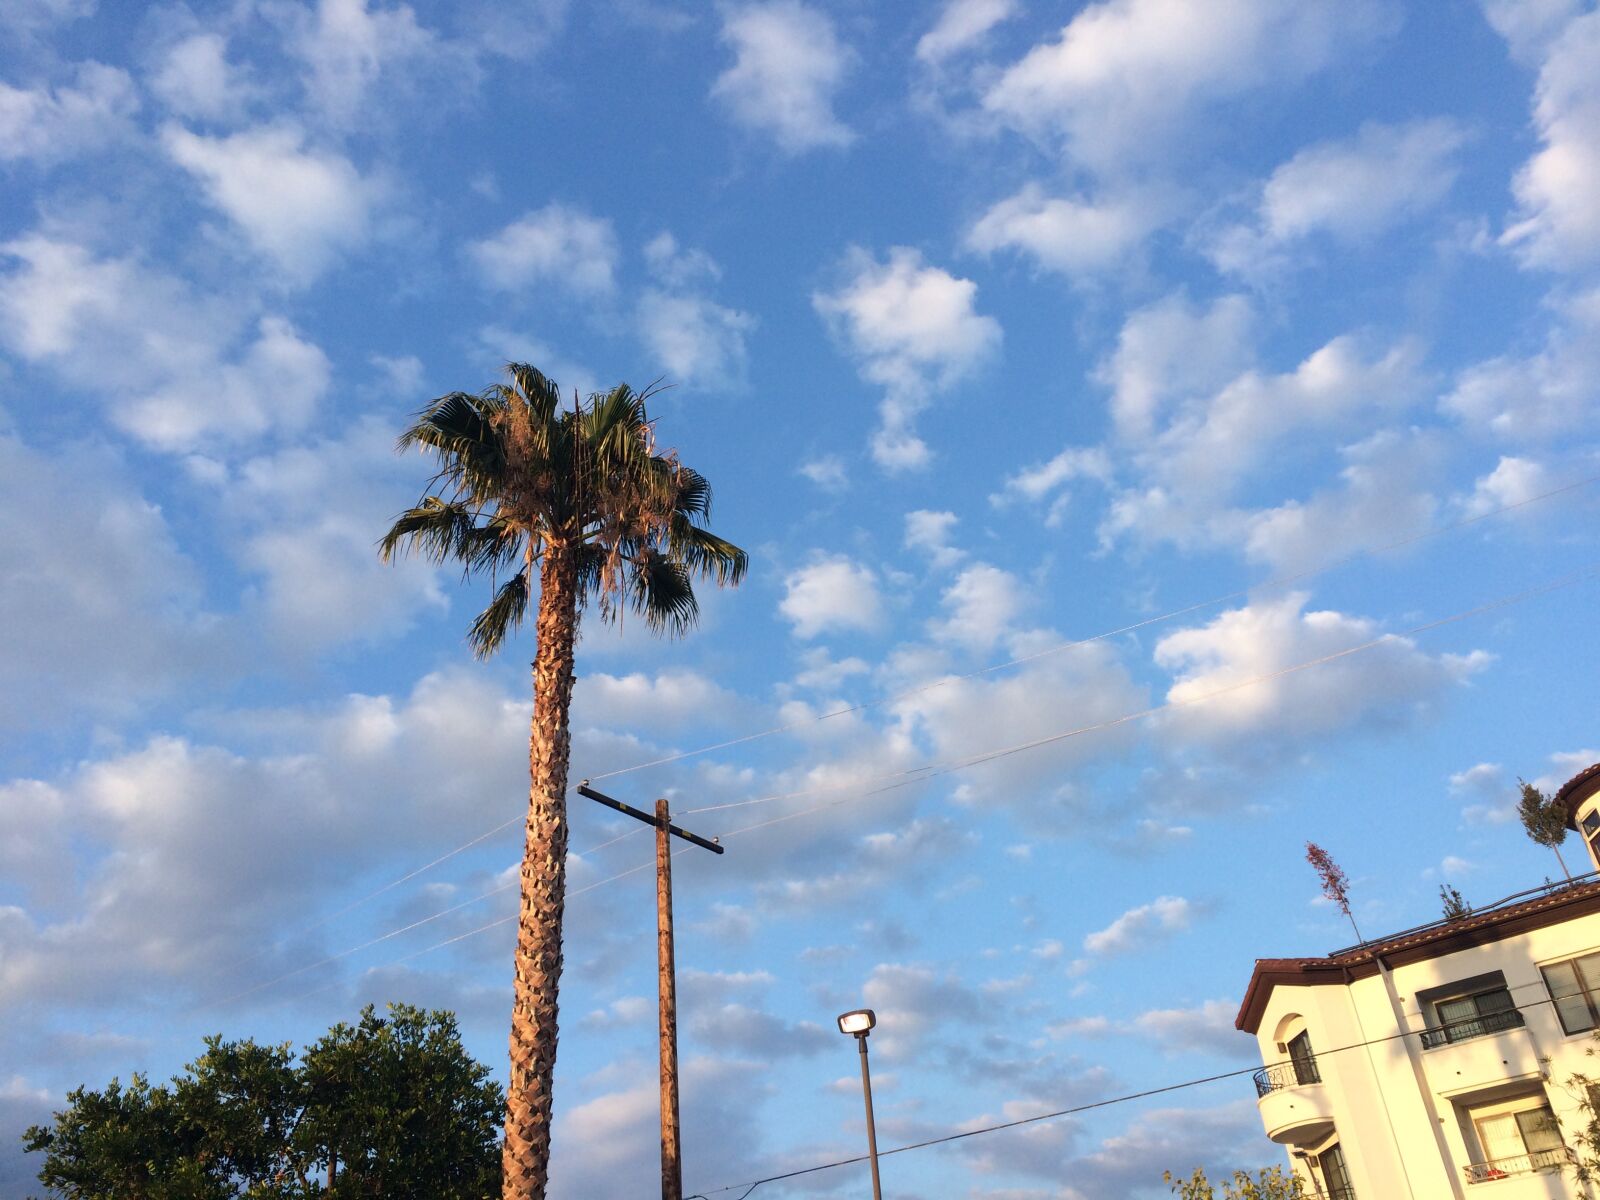 Apple iPhone 5s sample photo. Clouds, palm trees, sky photography